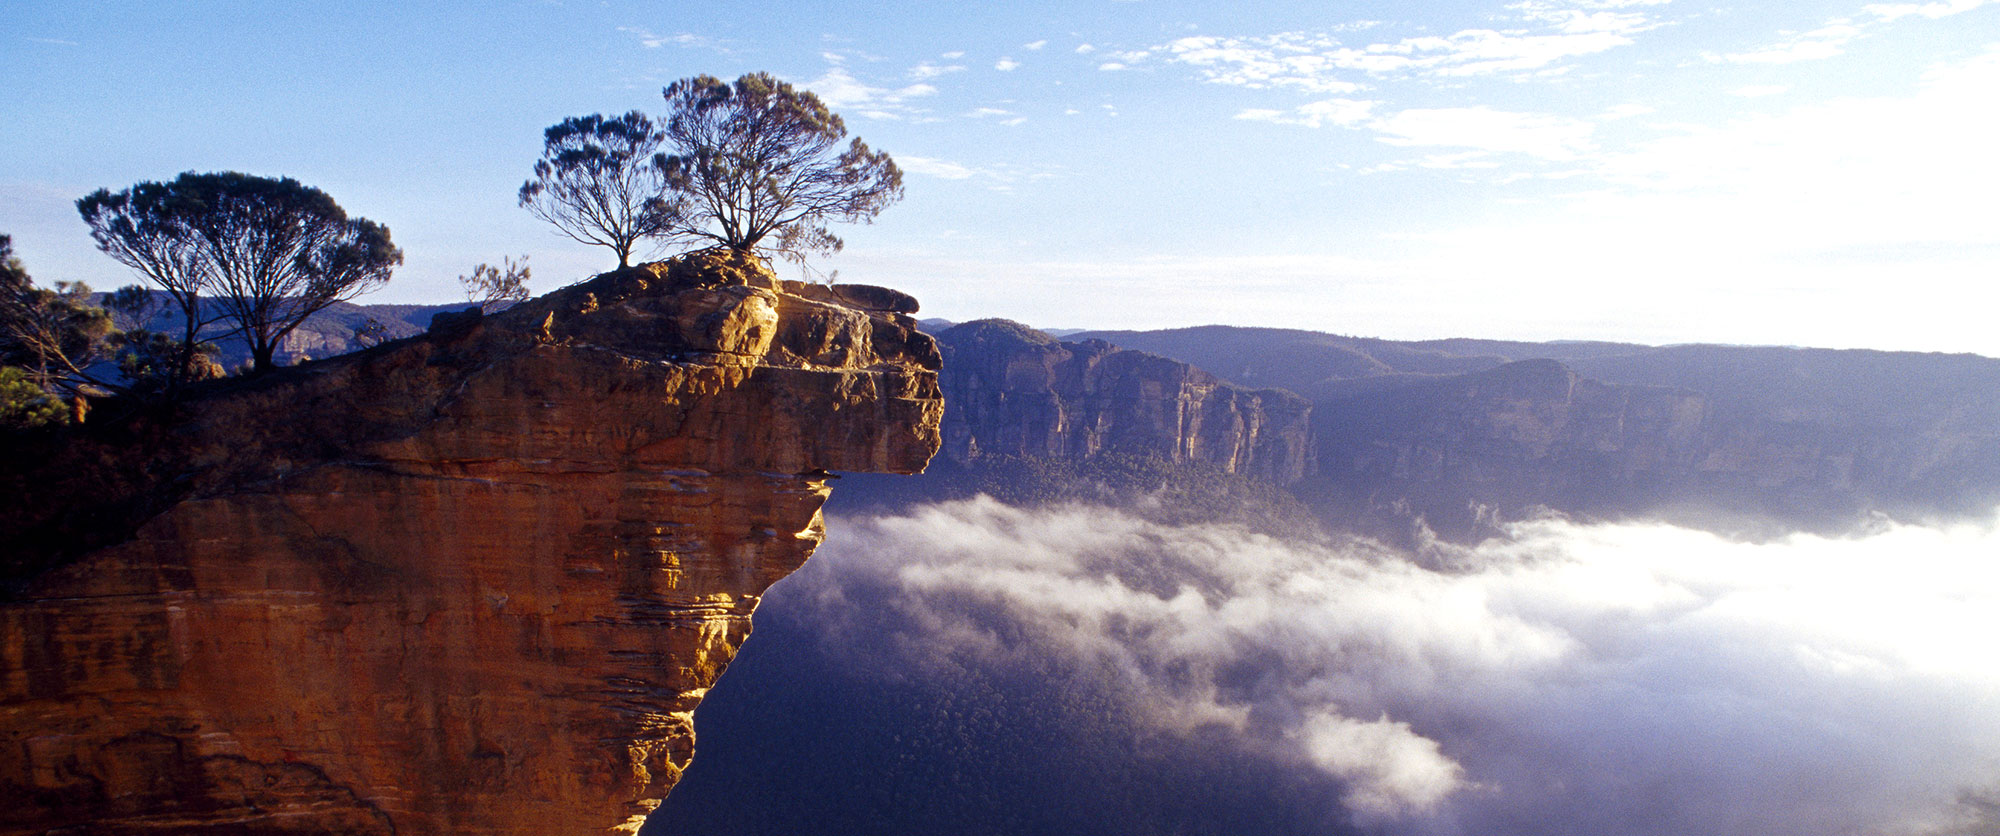 Australian Travel Packages: Sydney and Surrounds - Blue Mountains